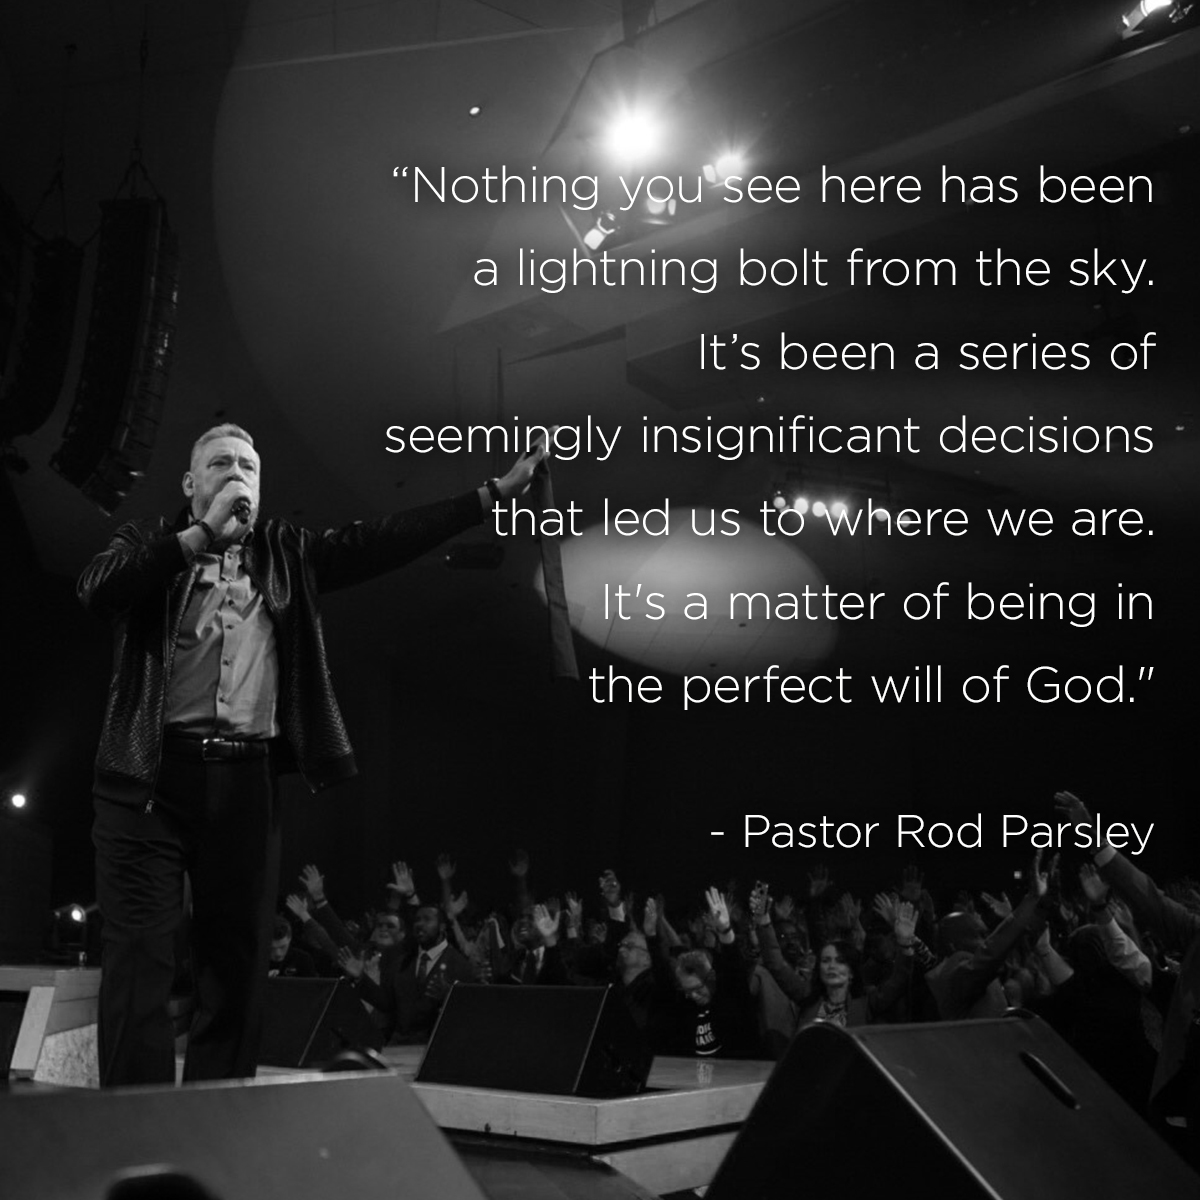 “Nothing you see here has been a lightning bolt from the sky. It’s been a series of seemingly insignificant decisions that led us to where we are. It’s a matter of being in the perfect will of God.” – Pastor Rod Parsley